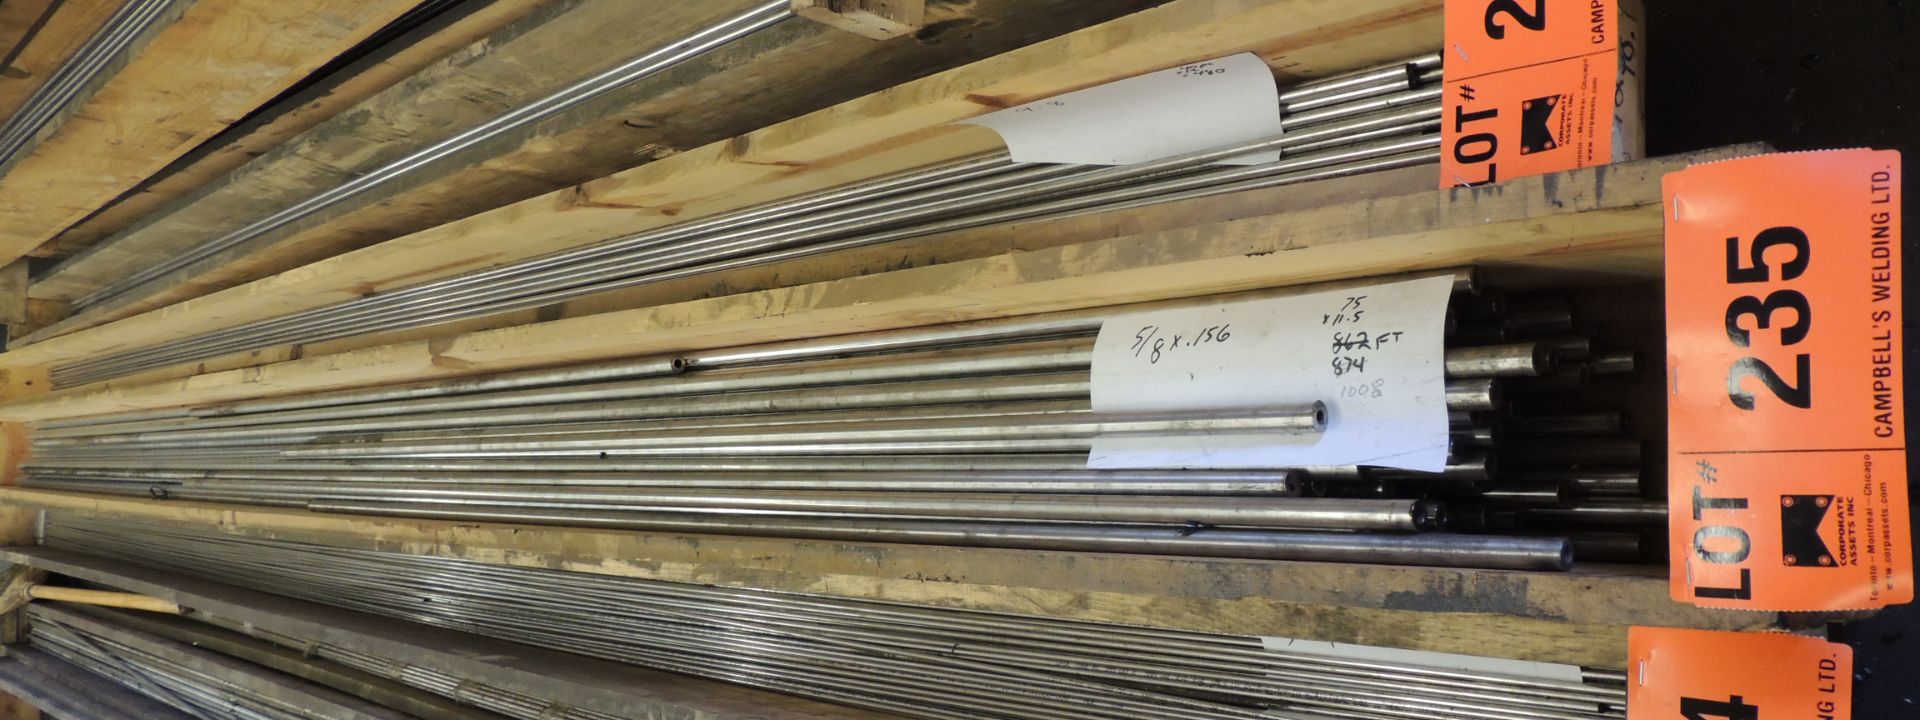 LOT/ 304 STAINLESS STEEL SEAMLESS TUBING - 5/18" OD X 0.156" WALL